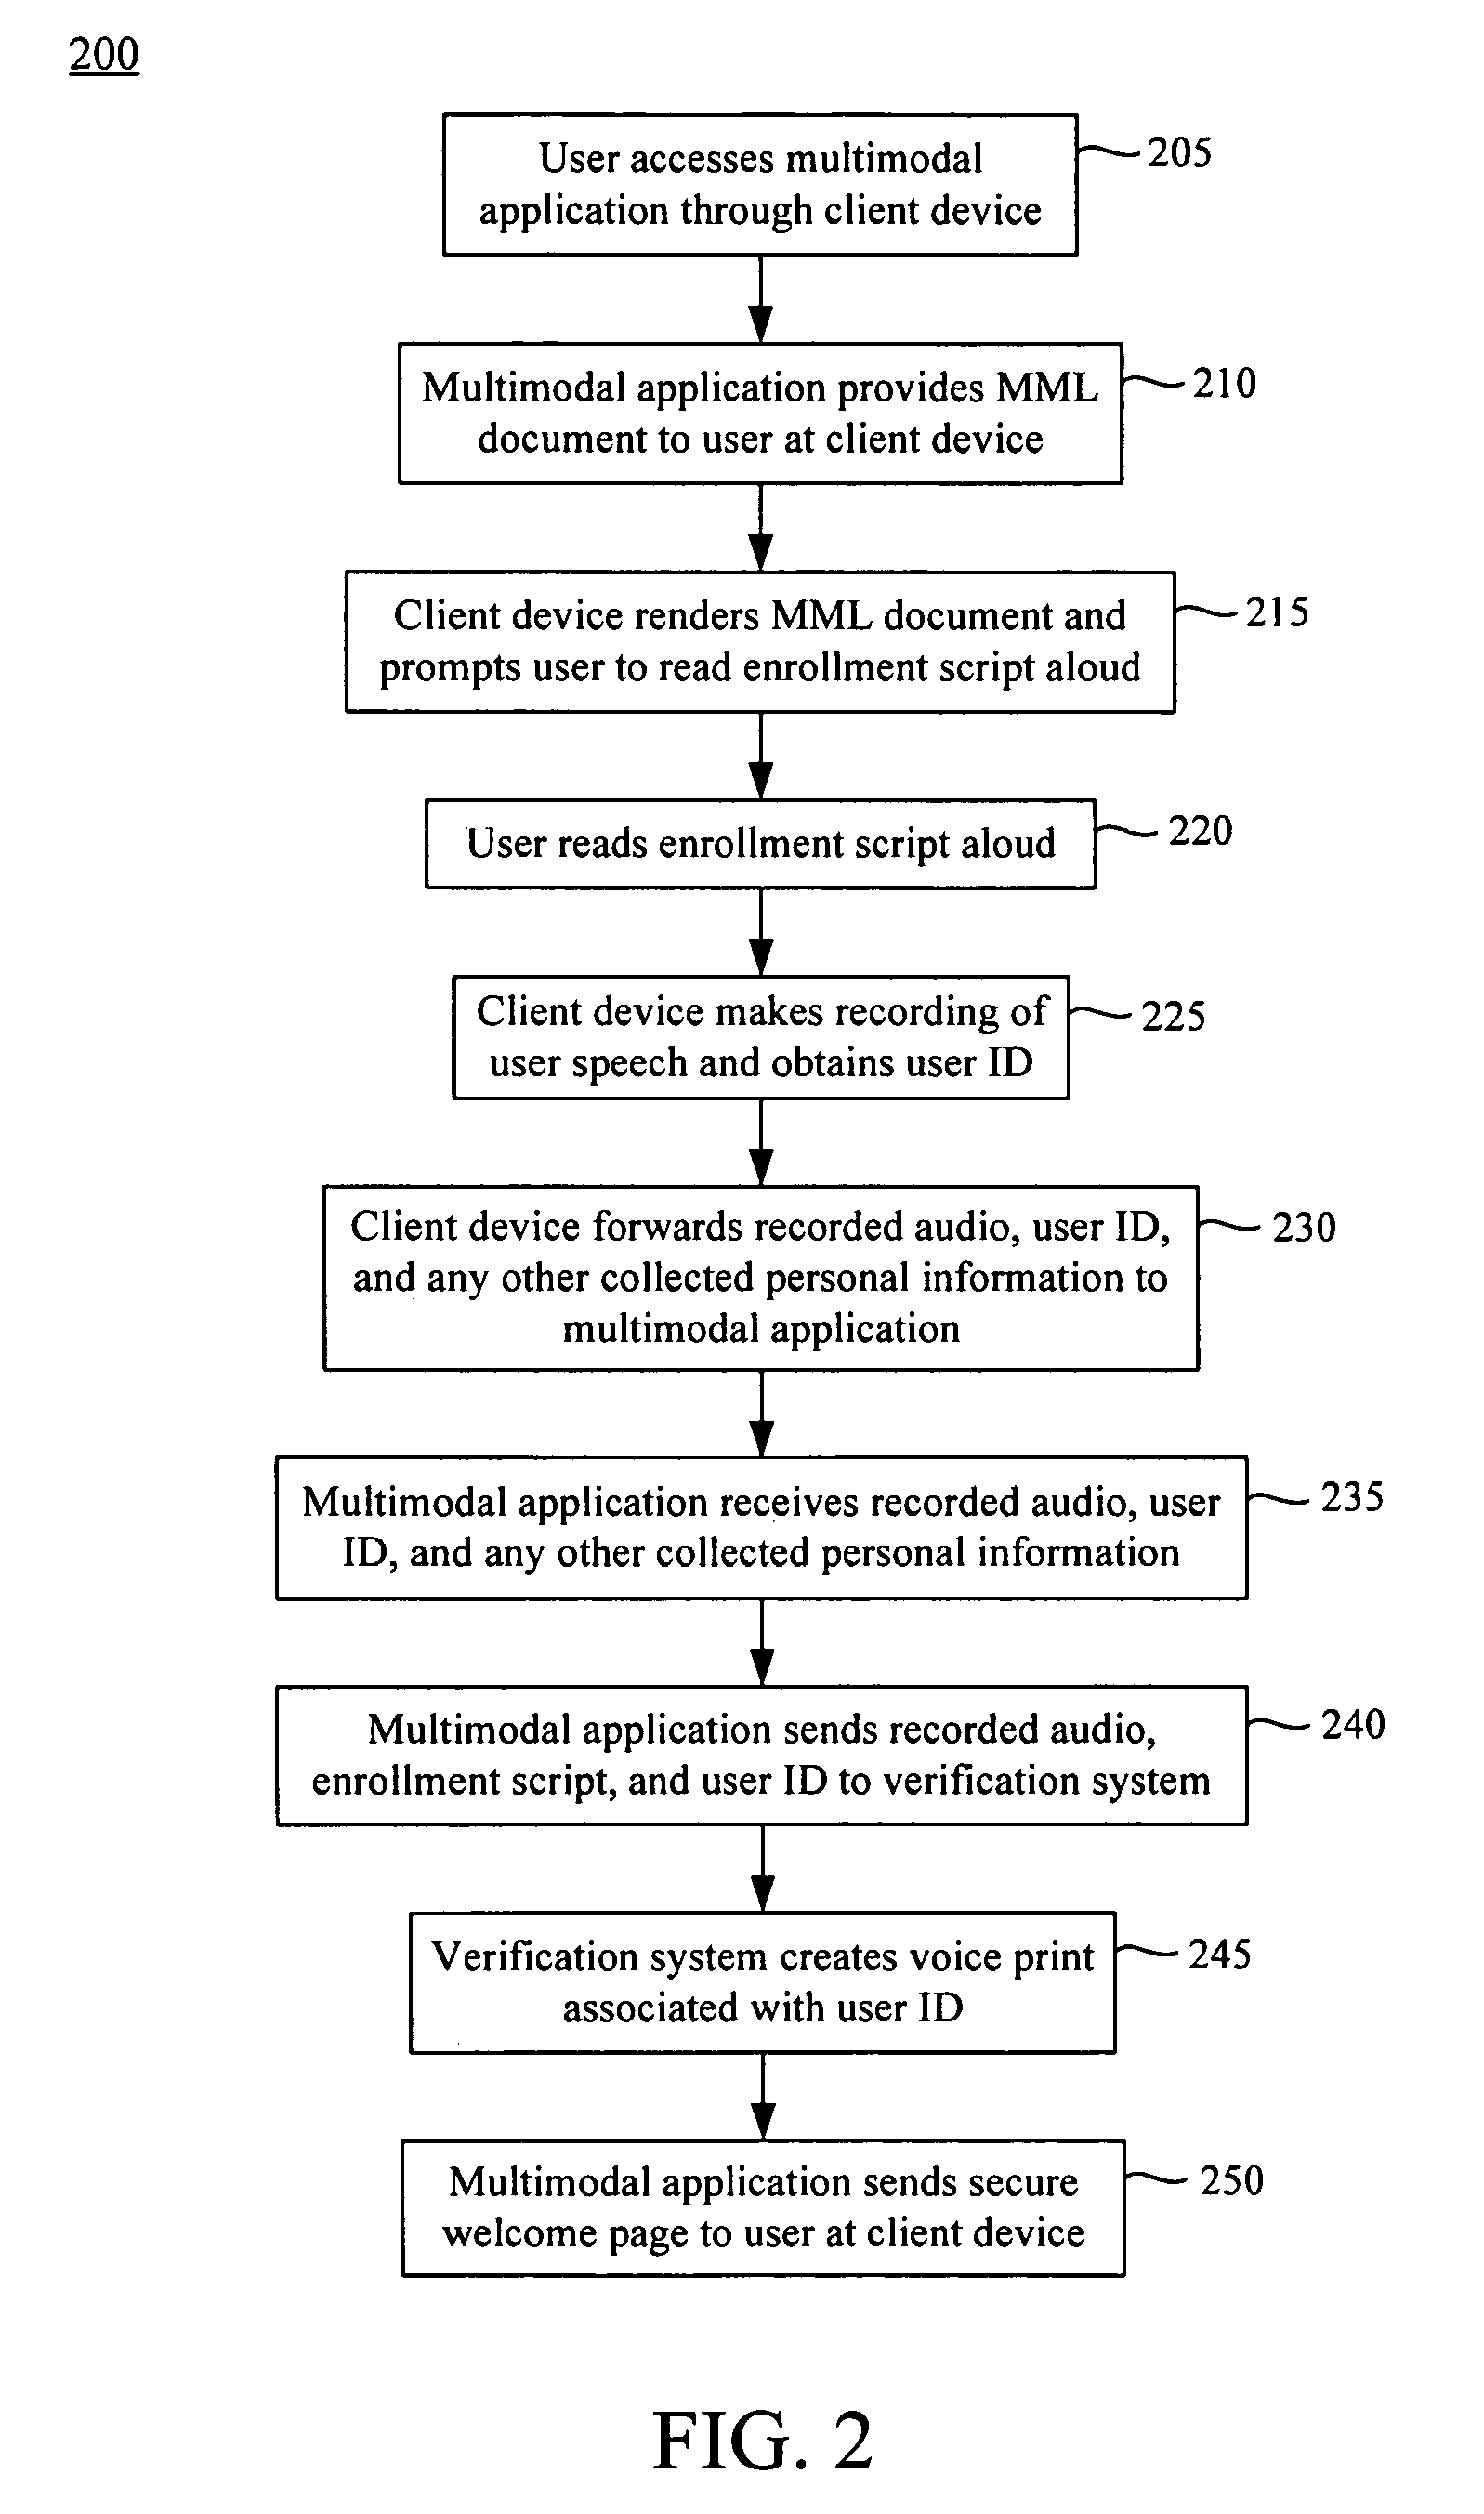 Verifying a user using speaker verification and a multimodal web-based interface